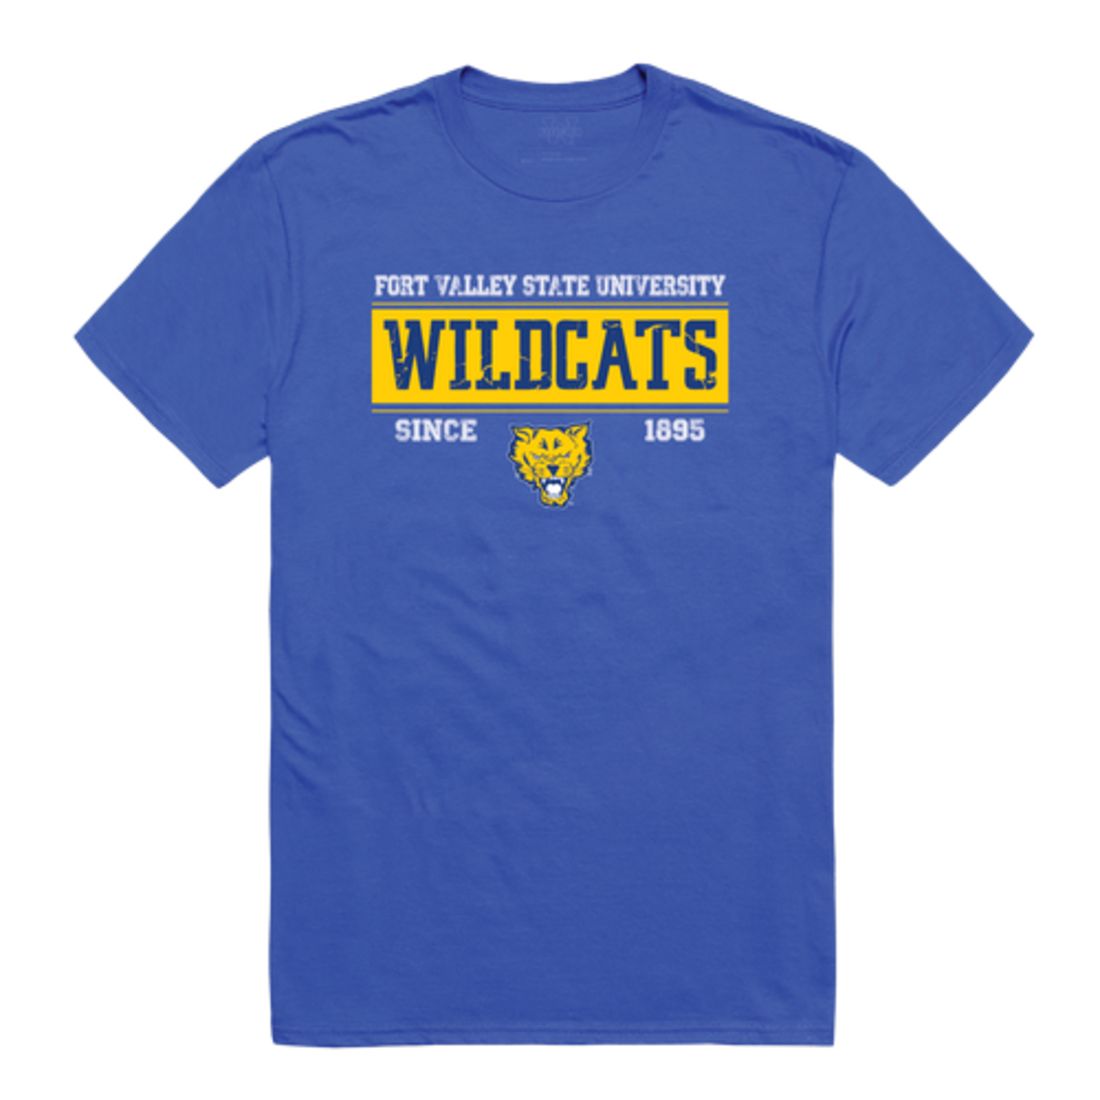 Fort Valley State University Wildcats Established T-Shirt Tee